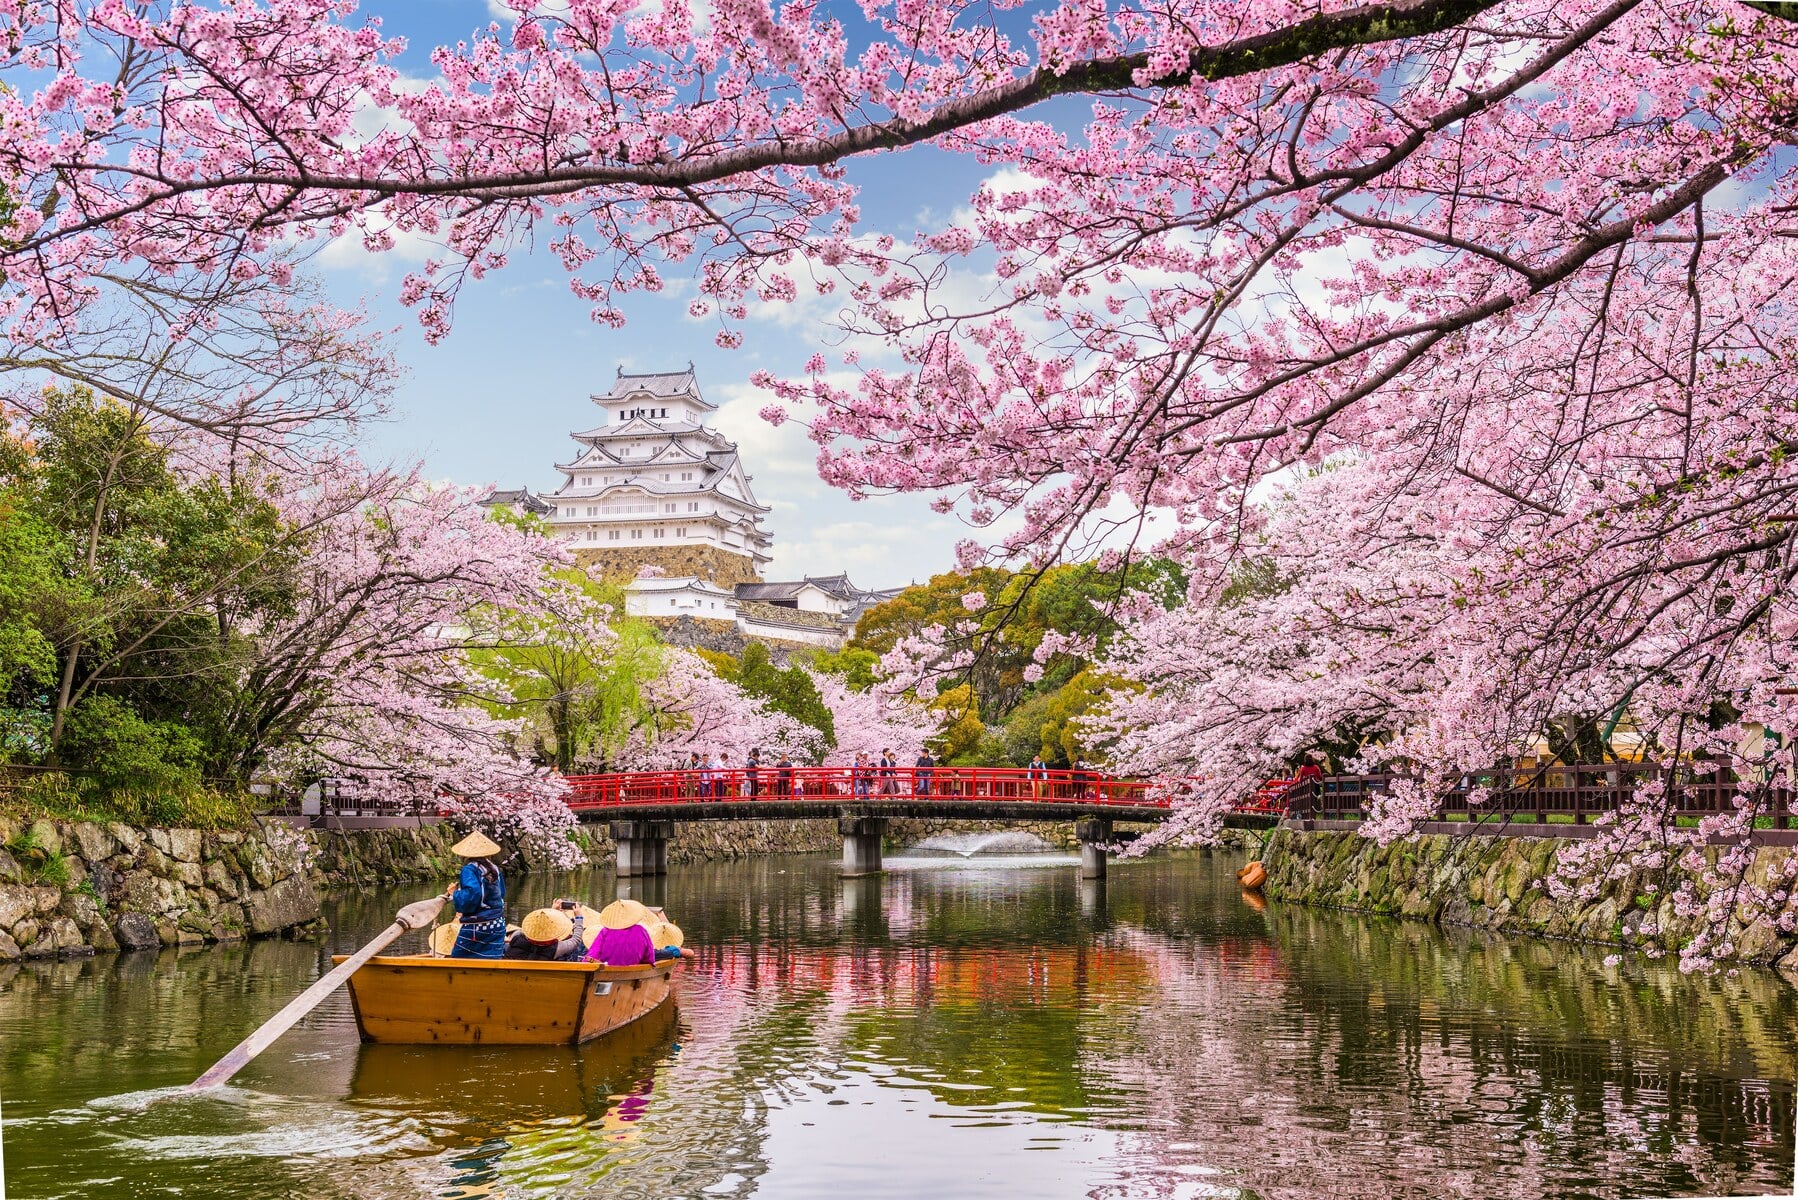 Japan-A beautiful country